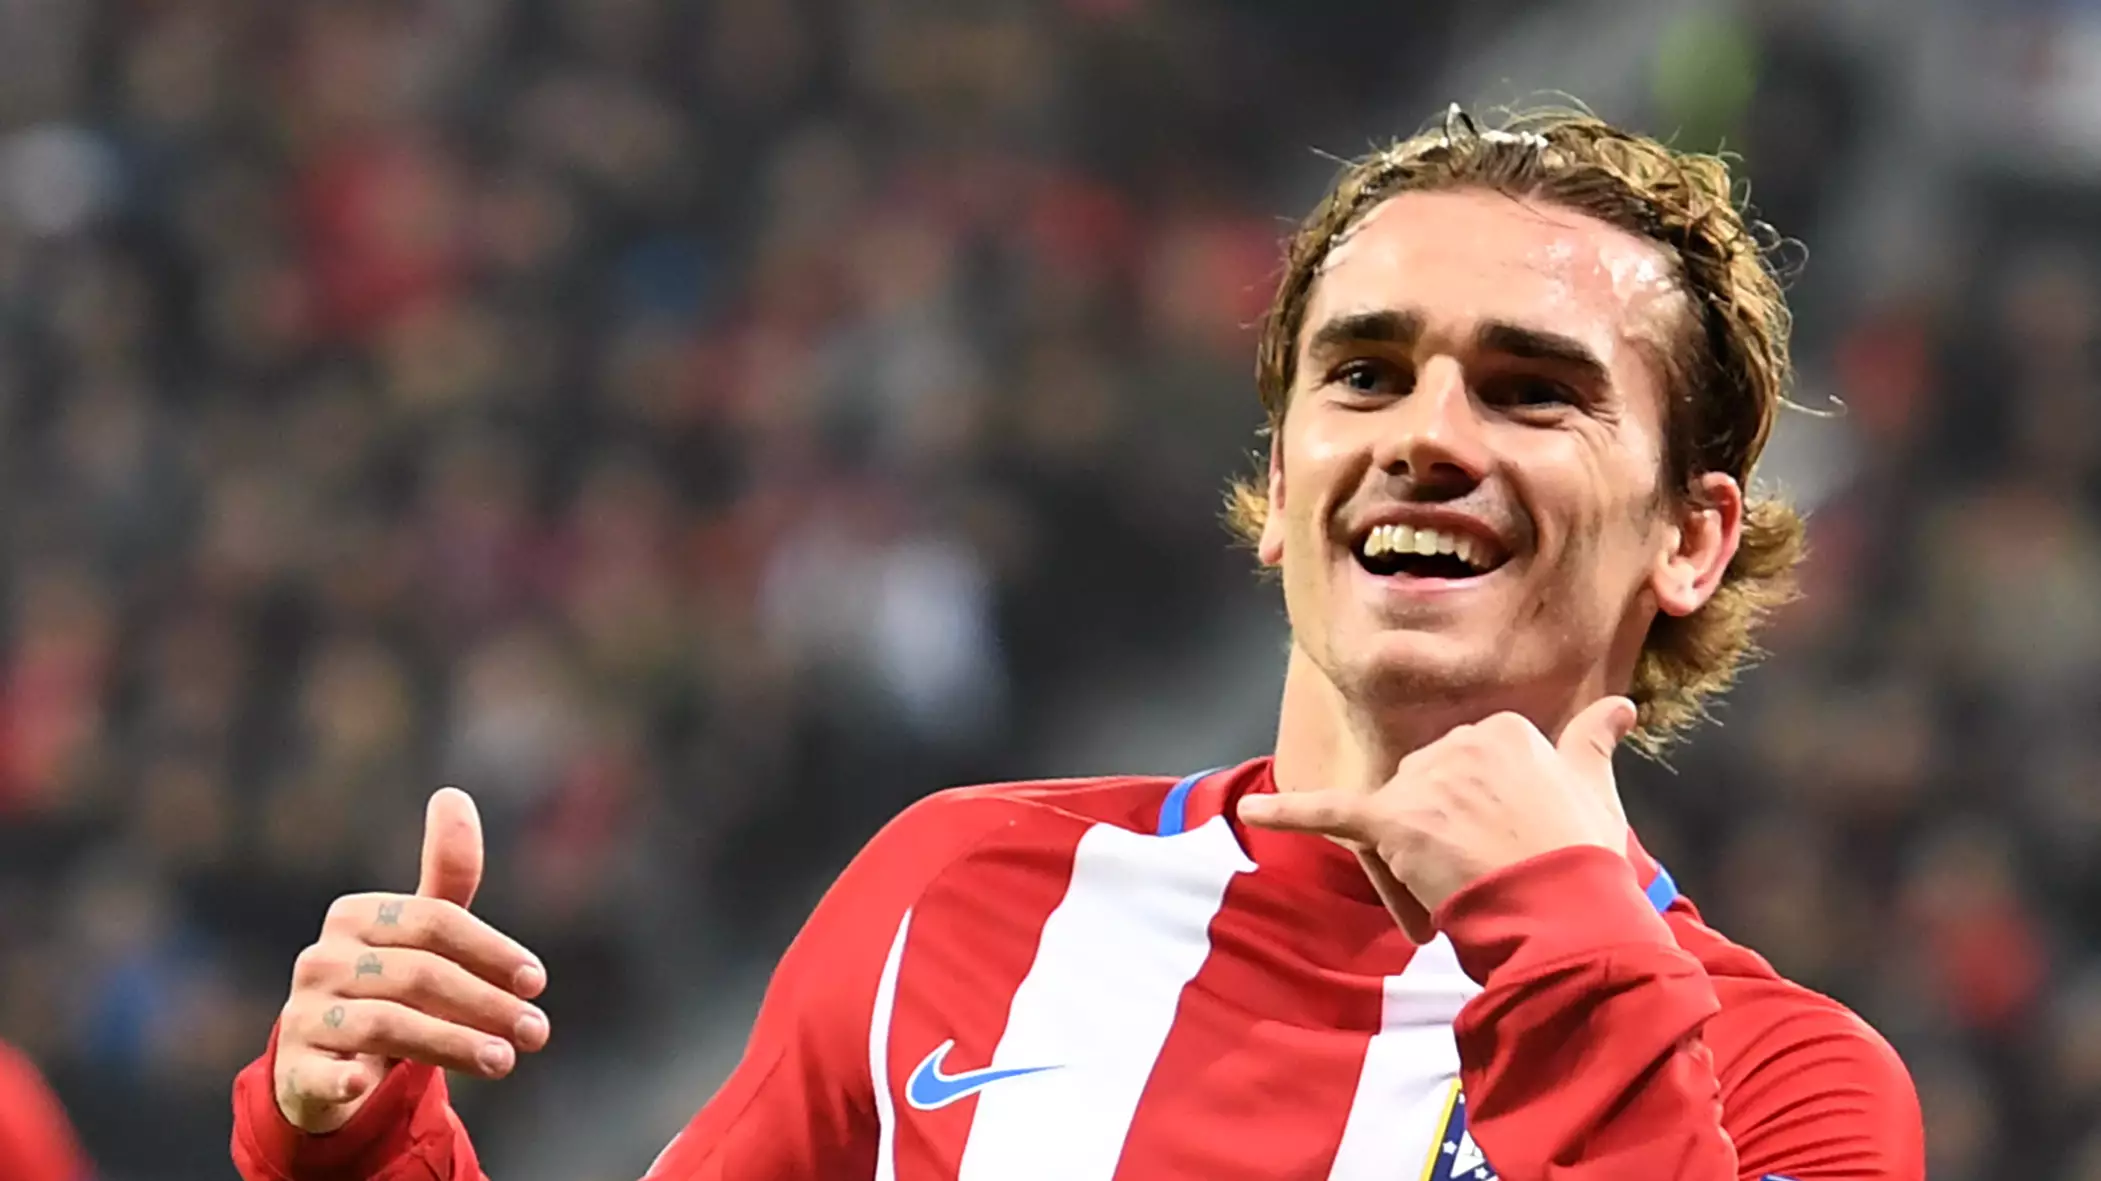 Could Griezmann be staying in Madrid after all? Image: PA Images